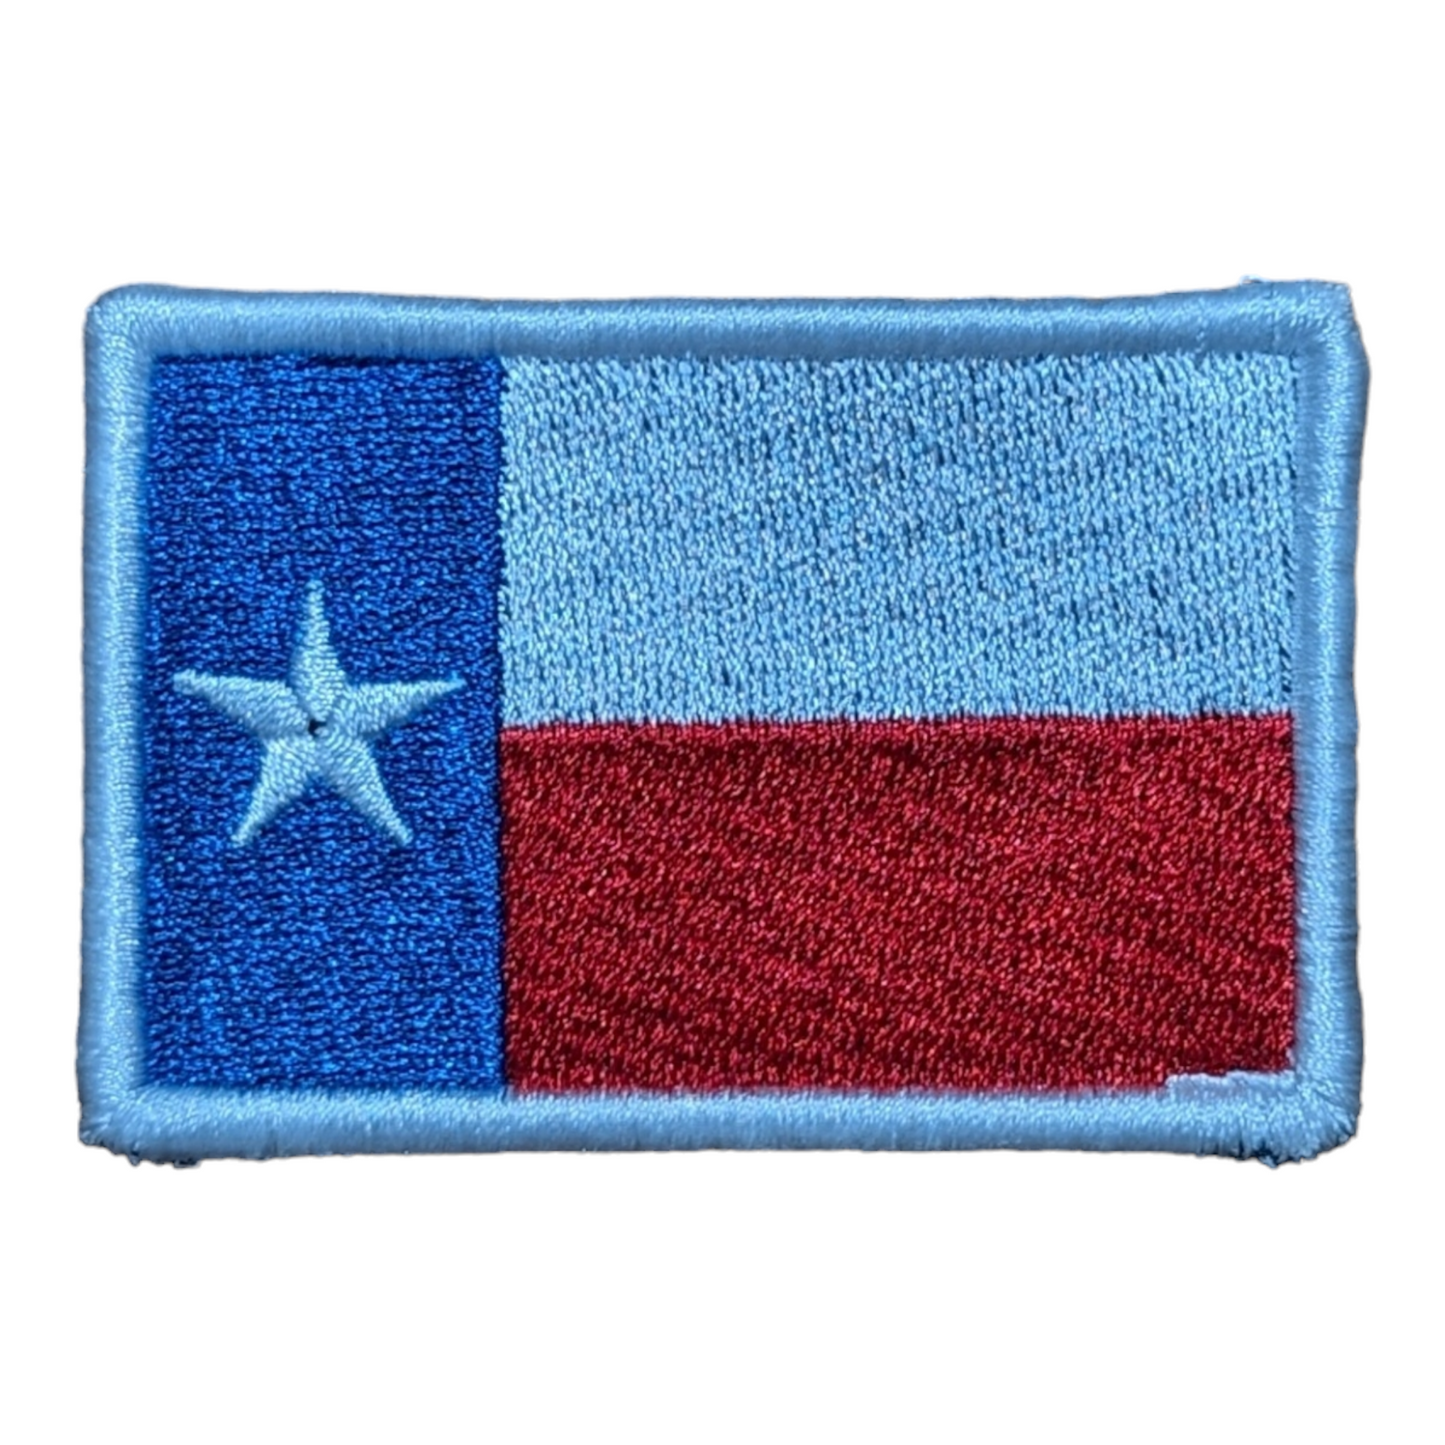 Texas State Patch